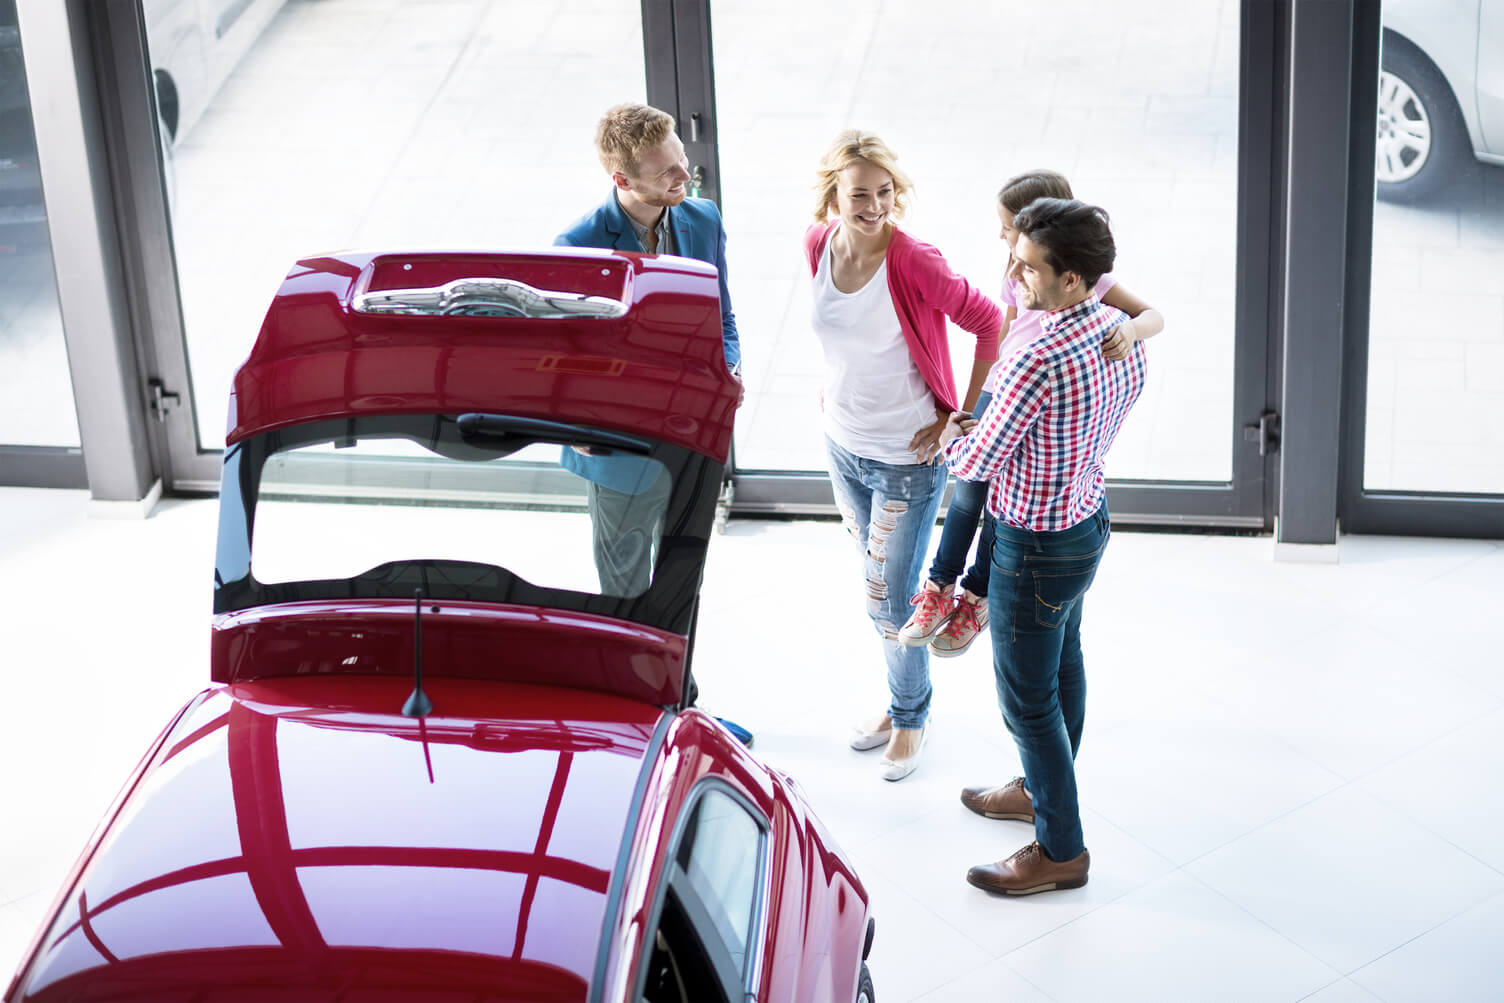 People looking at into the back of a car in a showroom floor.